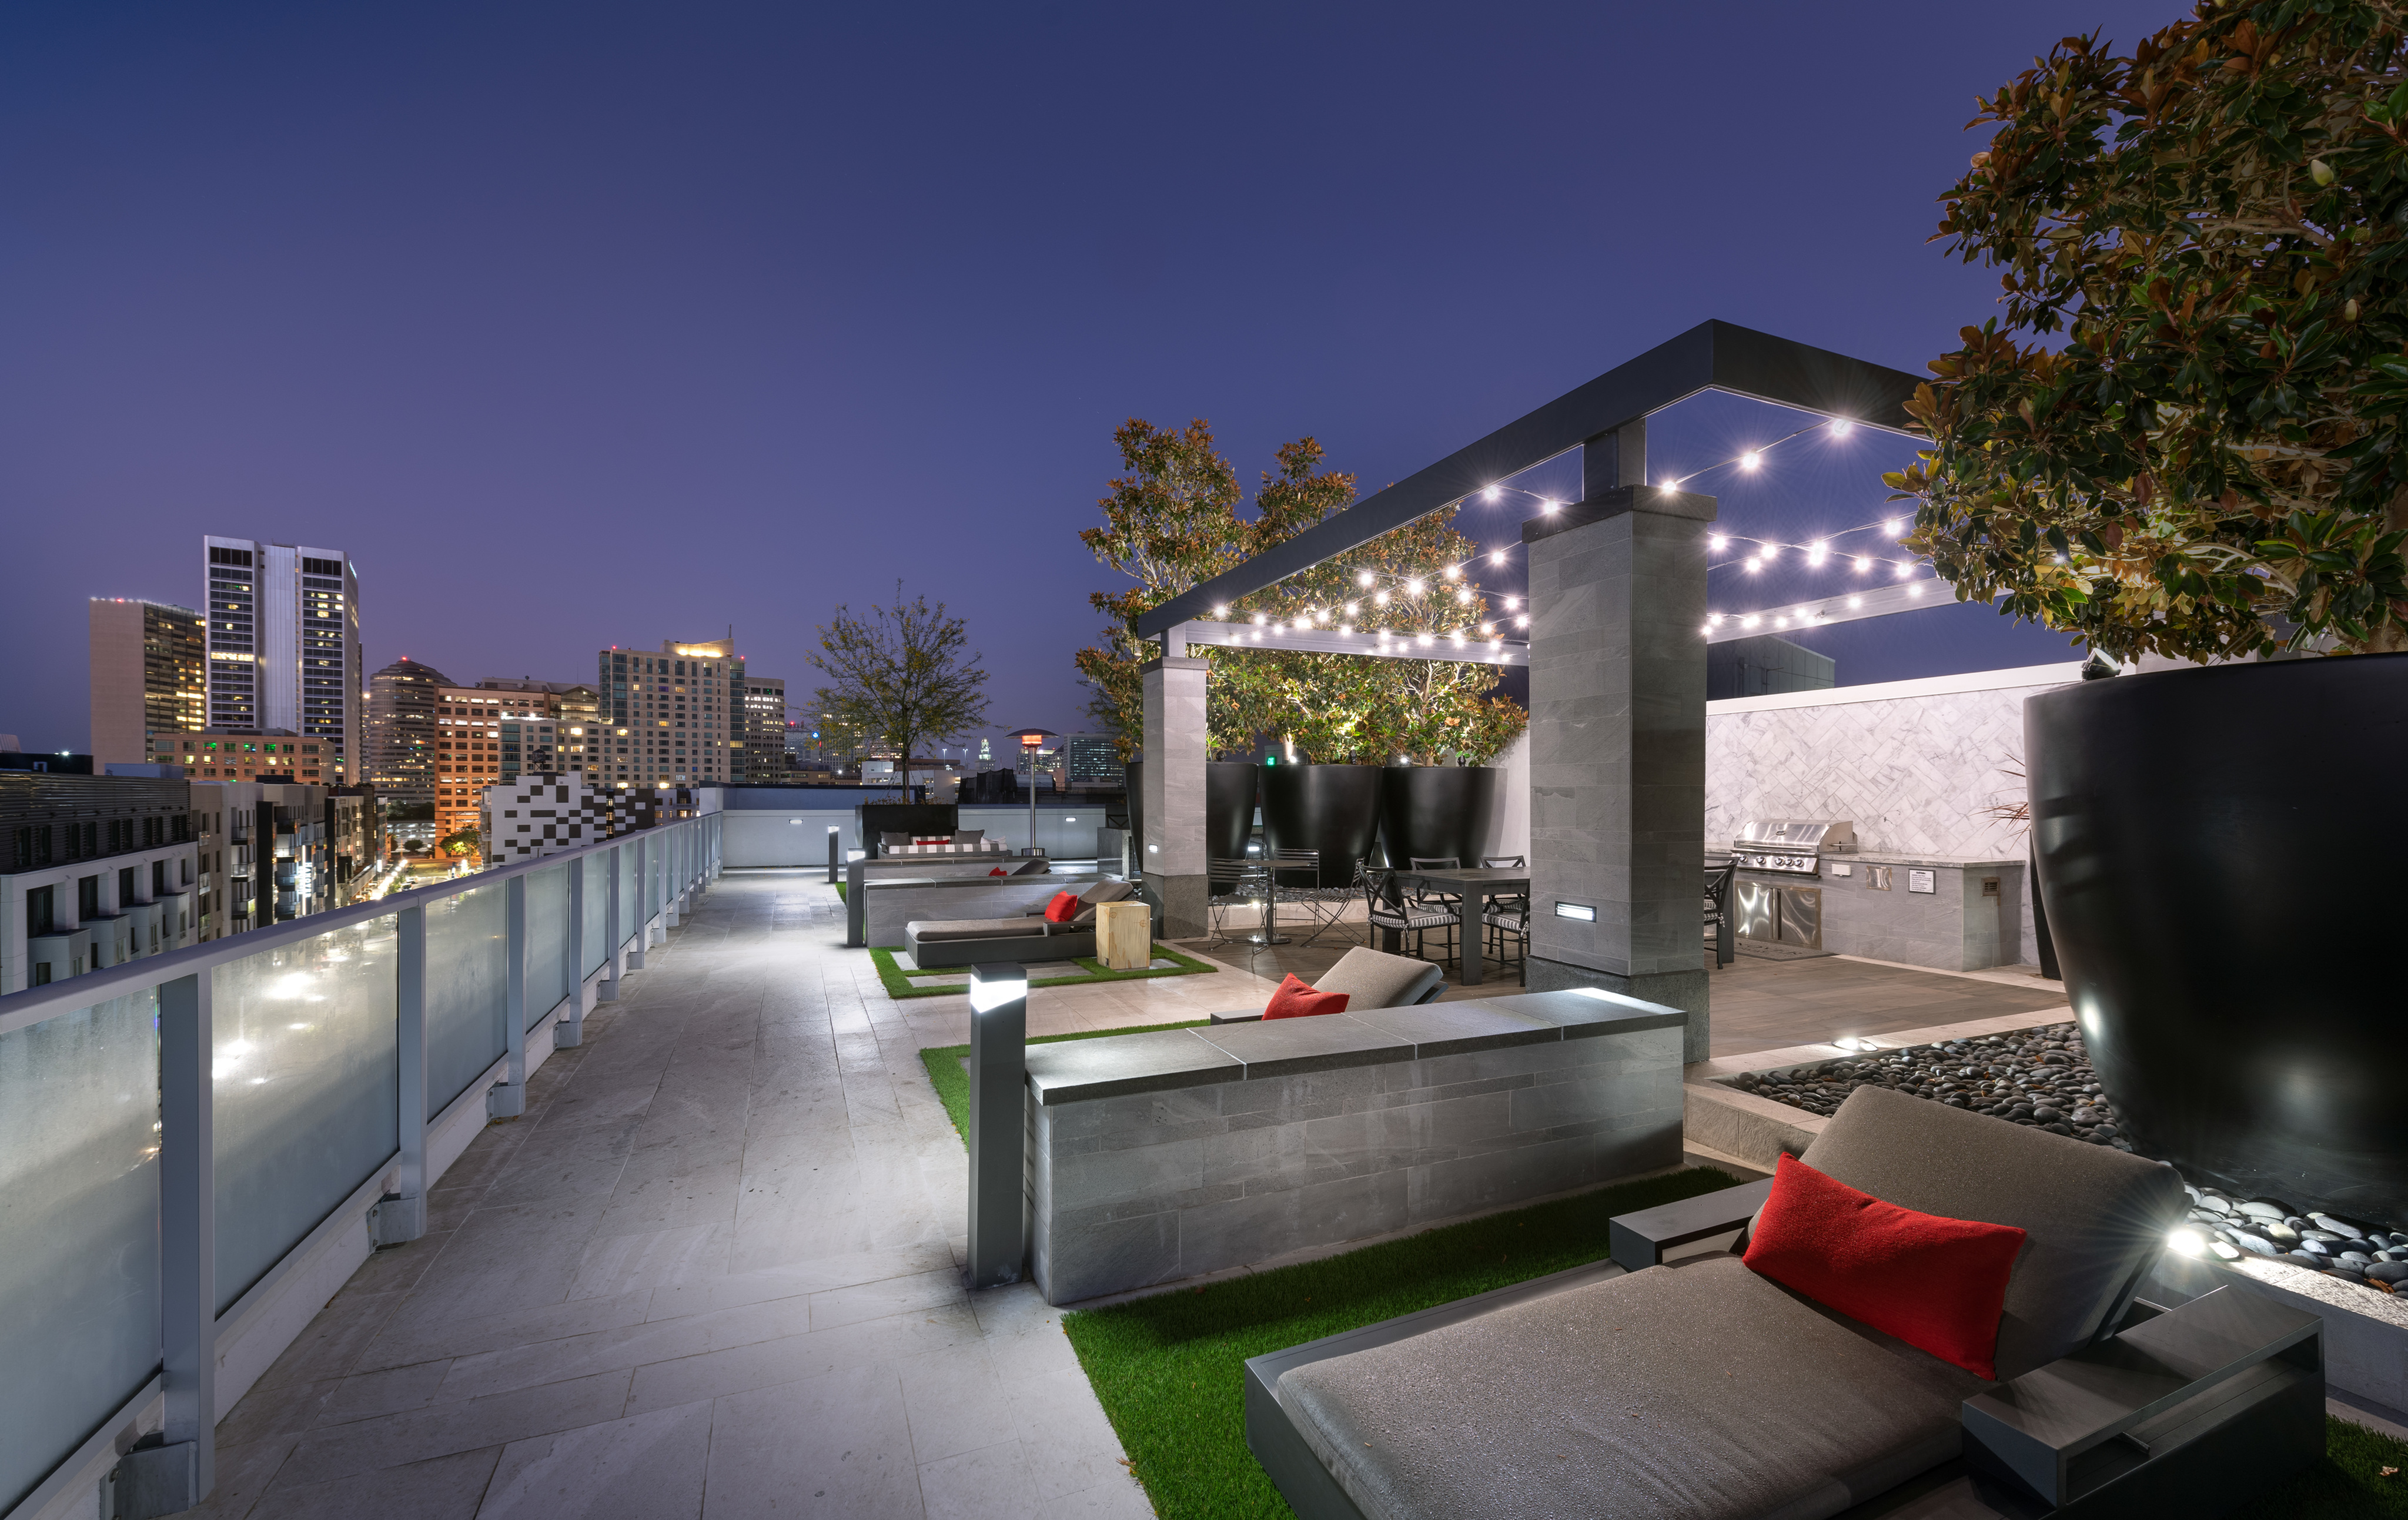 Rooftop Terrace Lounge with Expansive Lawn, Firepit and Outdoor Grilling Areas at Hanover Broadway